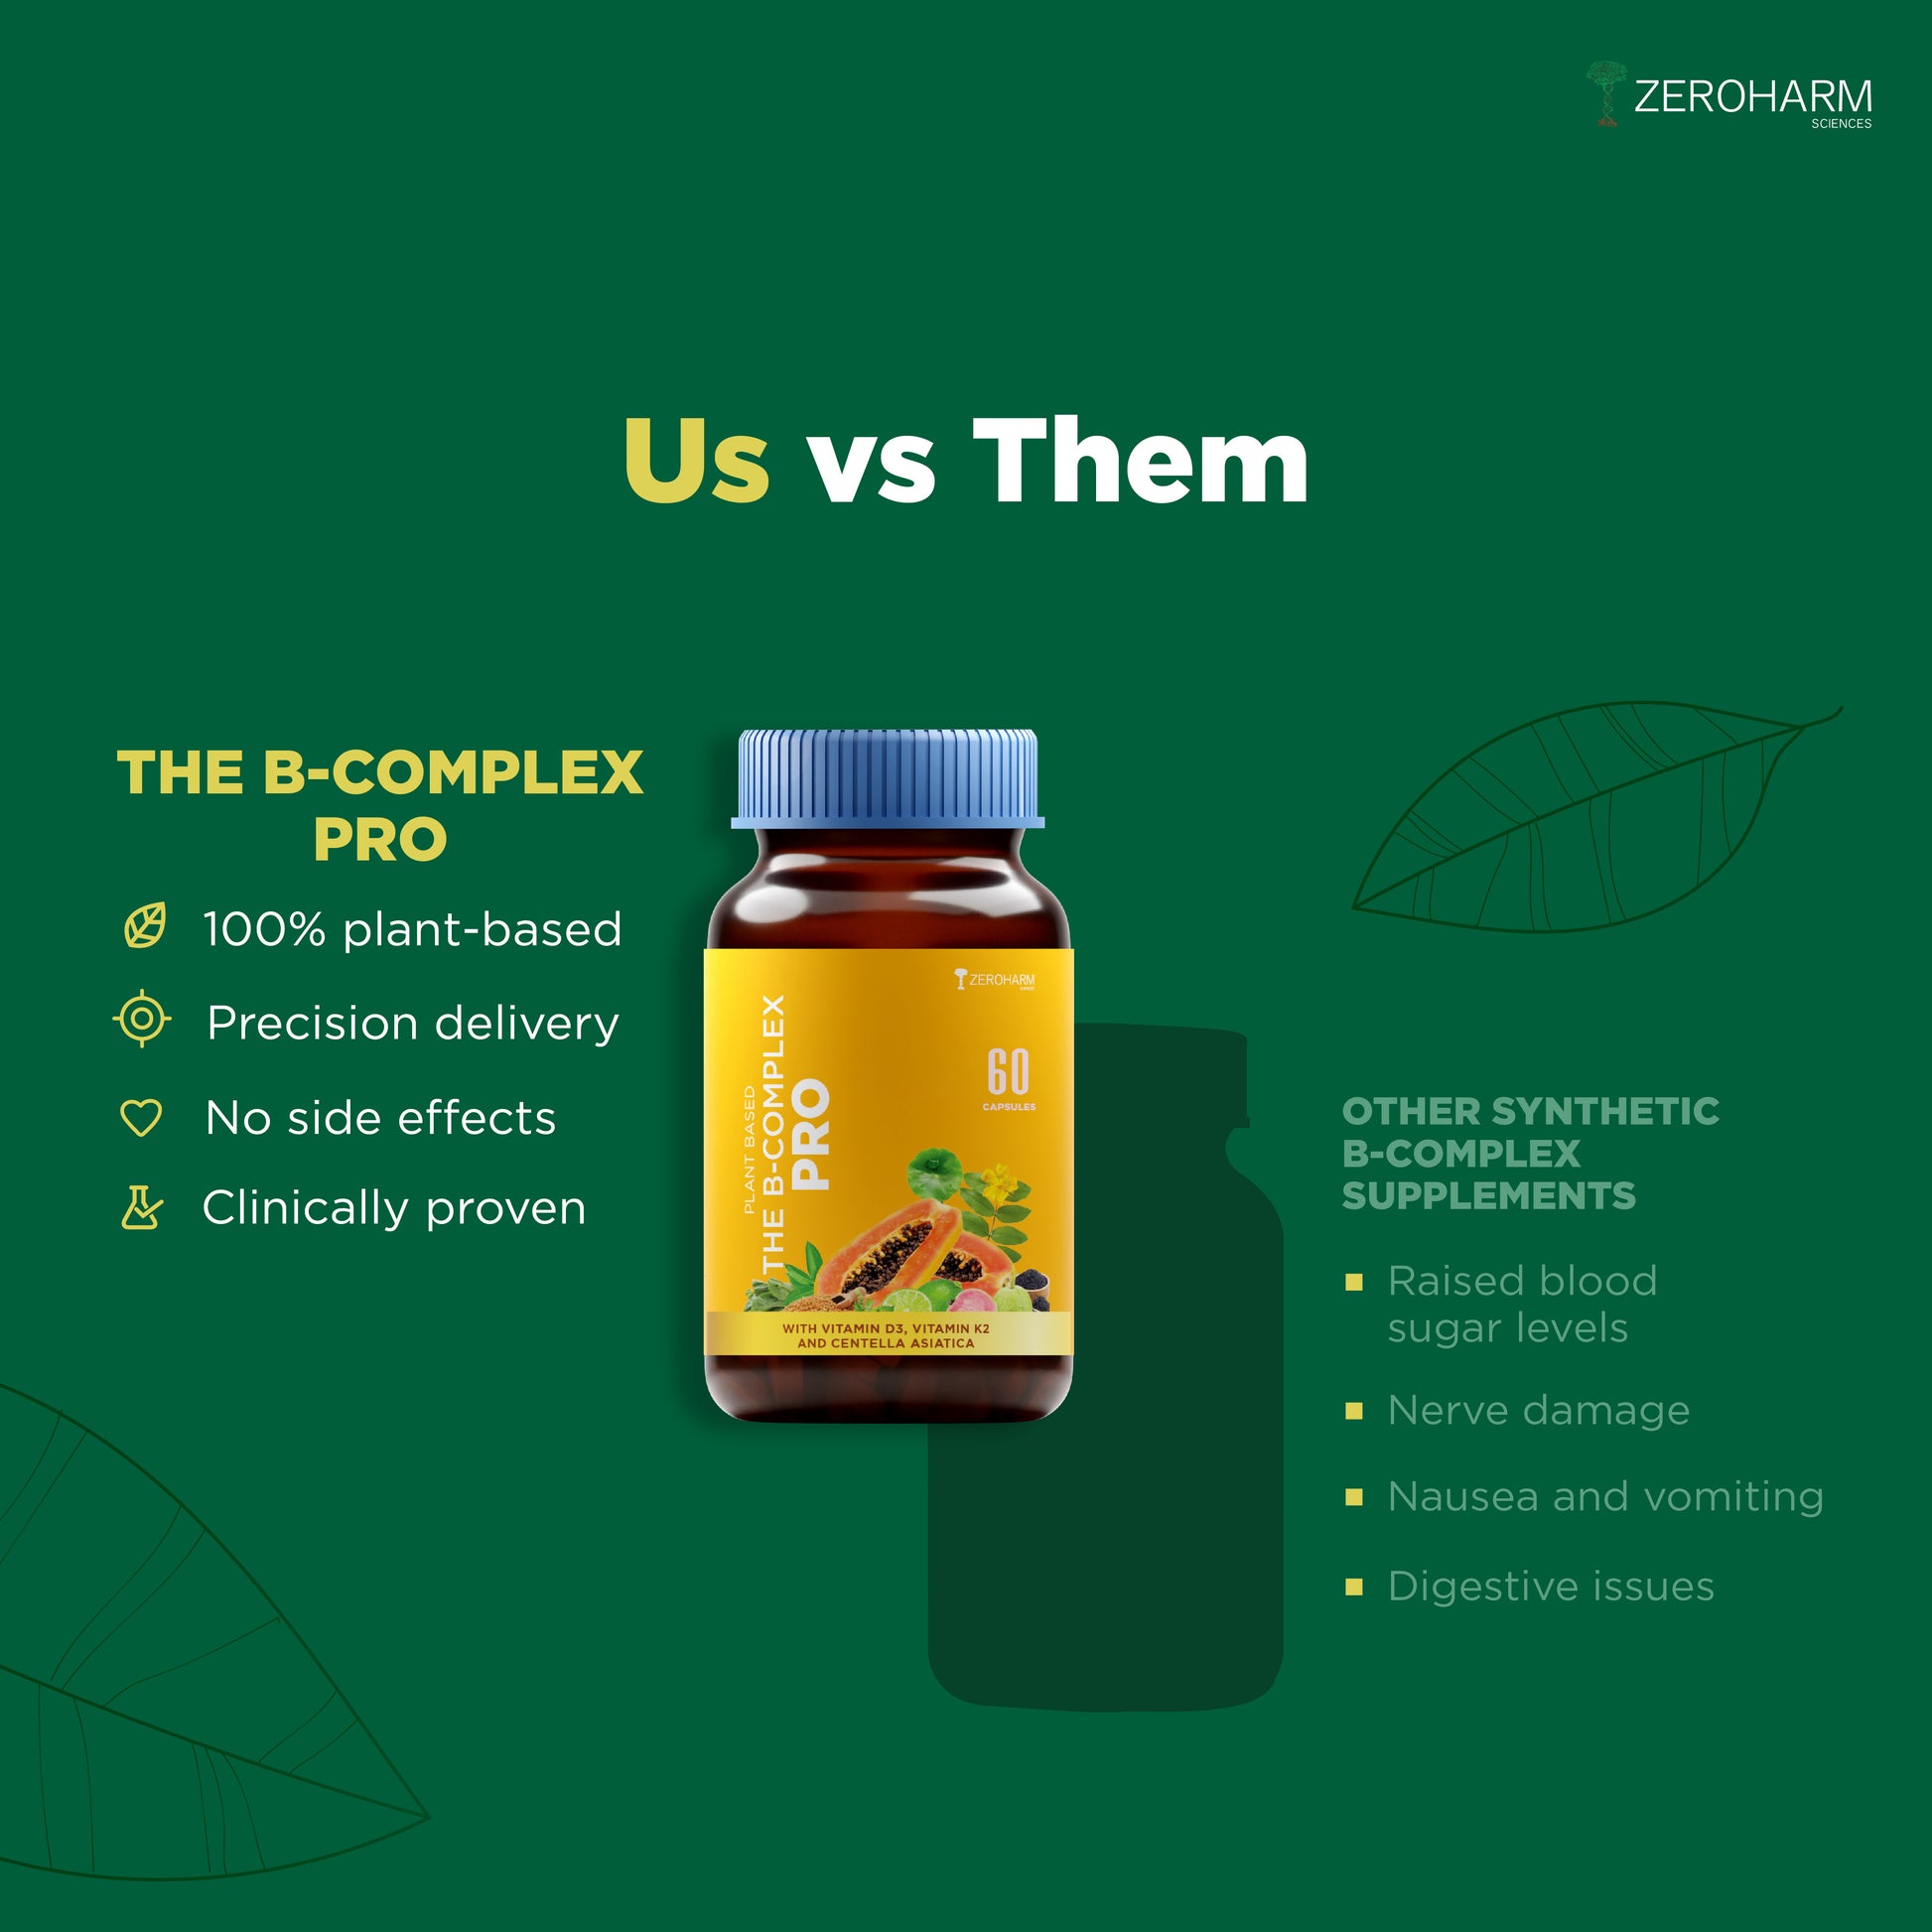 Zeroharm vitamin b complex tablets vs other synthetic b-complex supplements